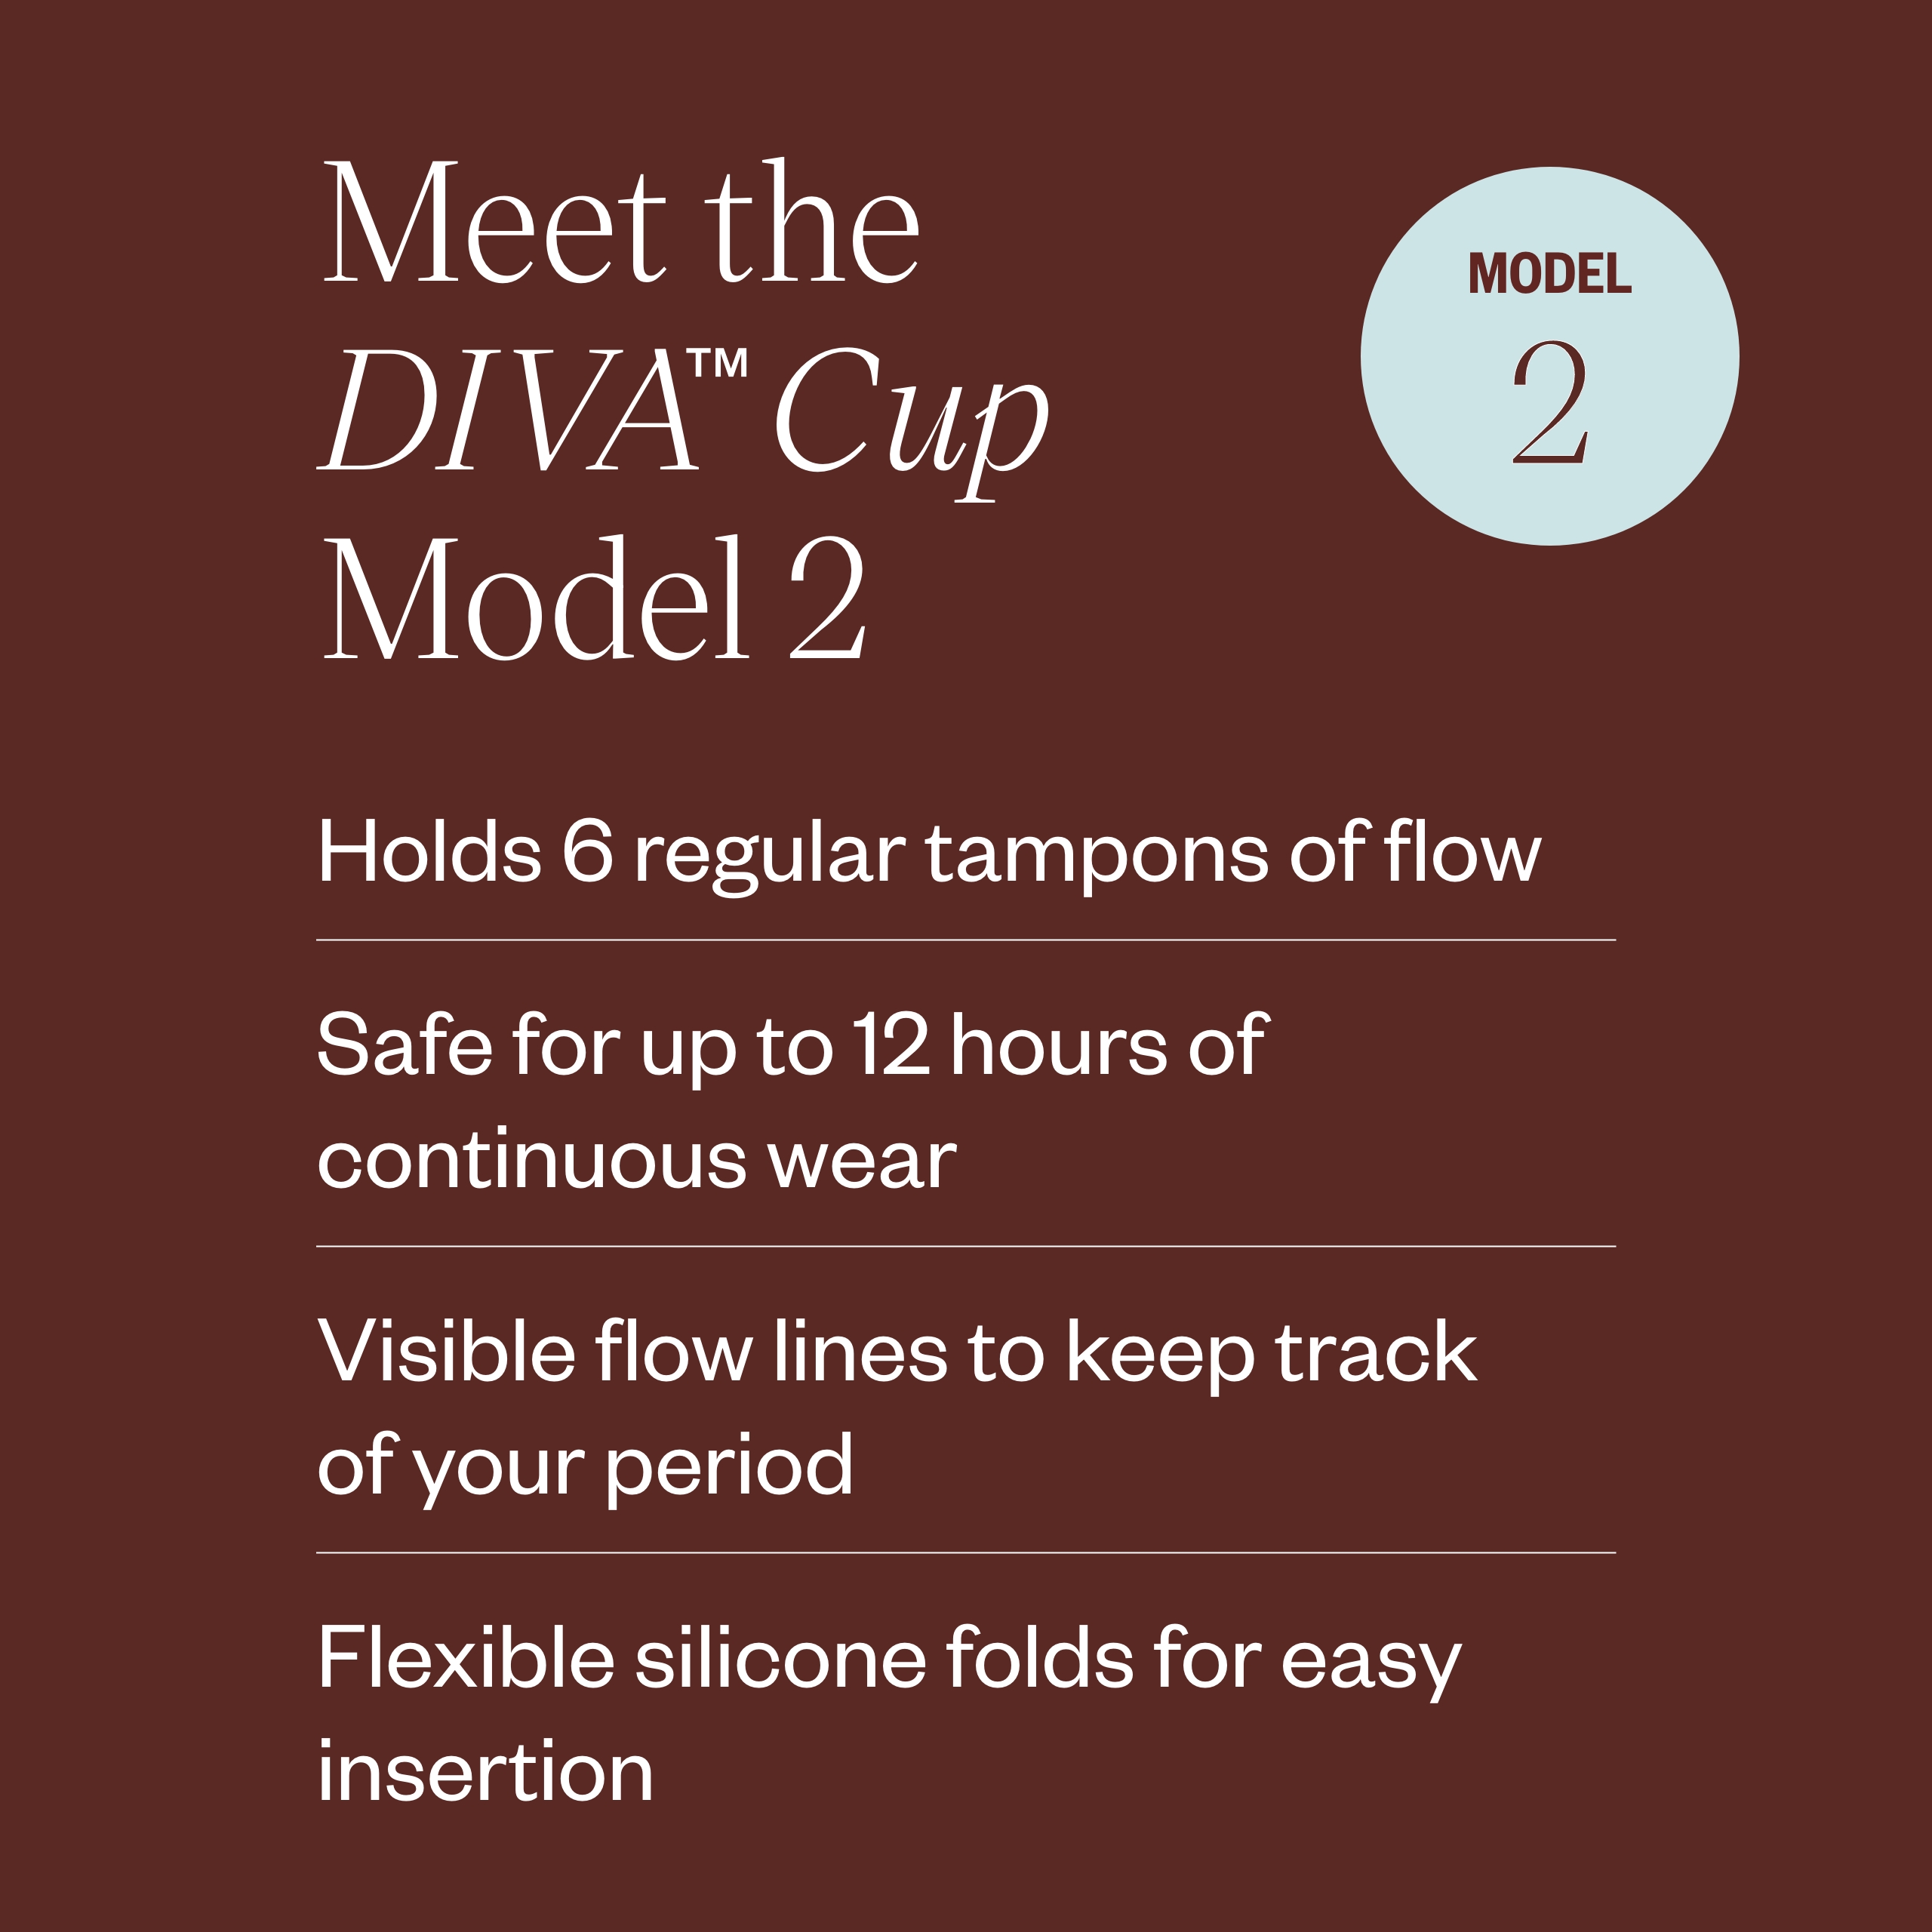 DIVA Cup Model 2 Reusable Menstrual Cup, For Post-Partum & Ages 35+ - image 3 of 7